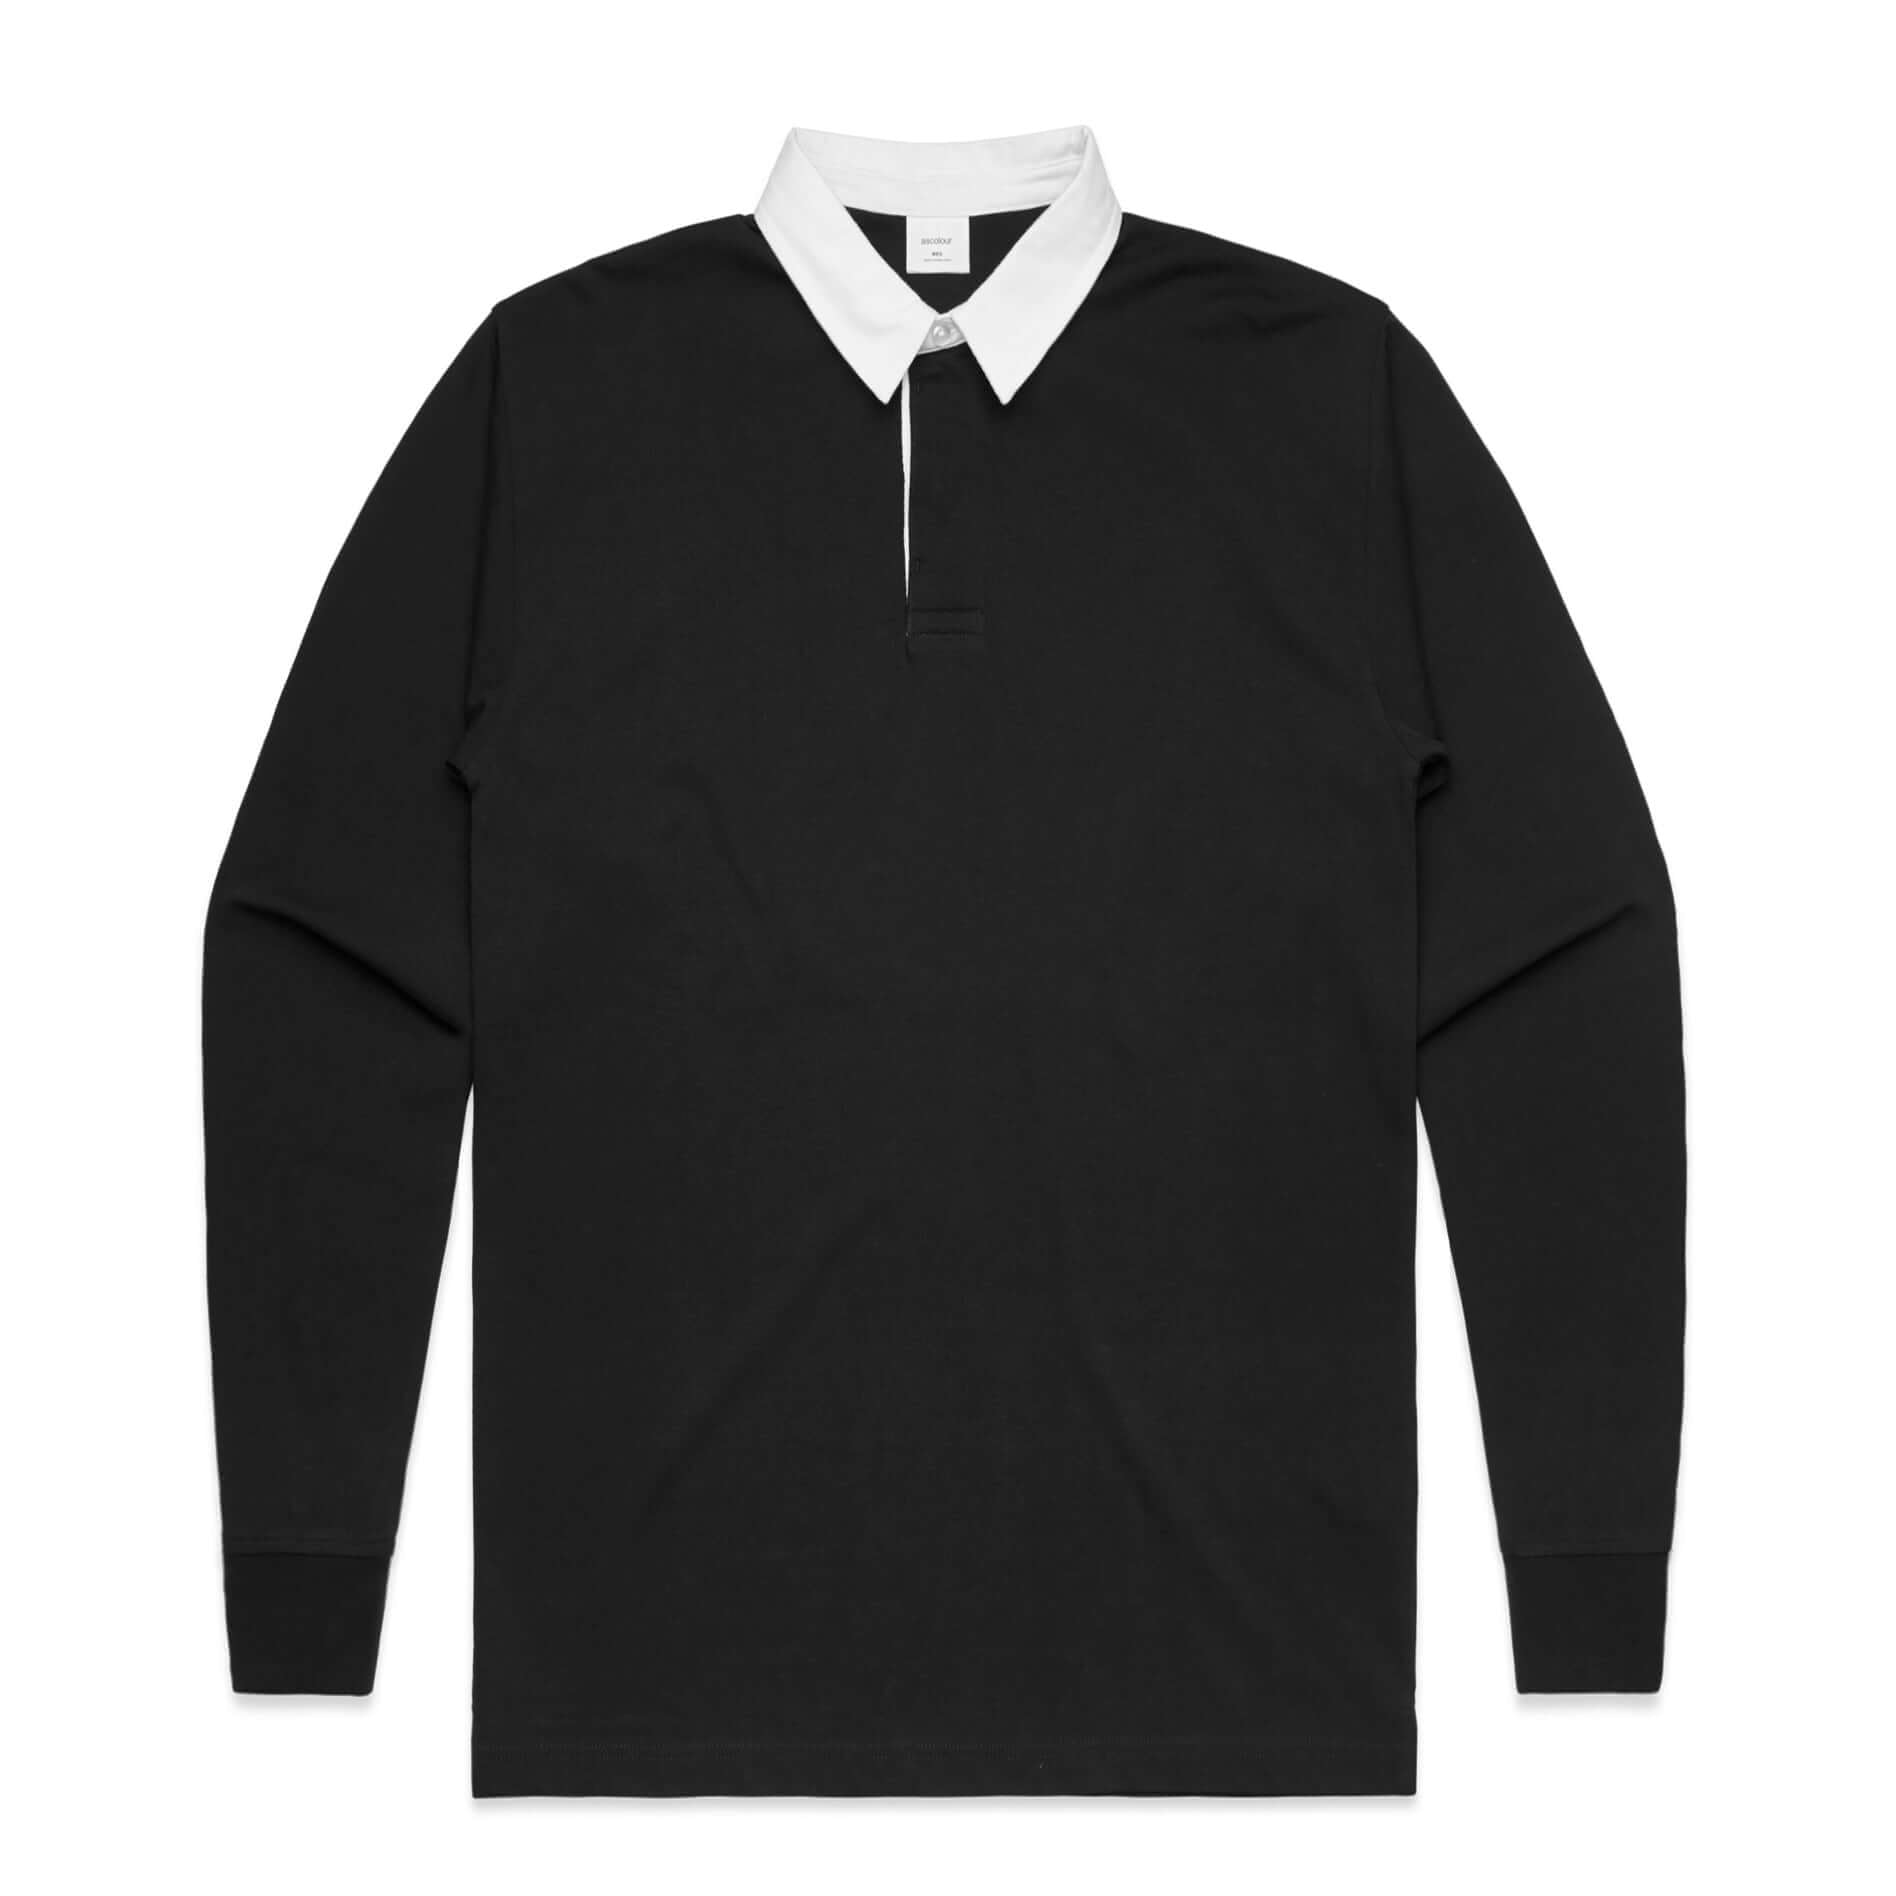 AS Colour RUGBY JERSEY - Black